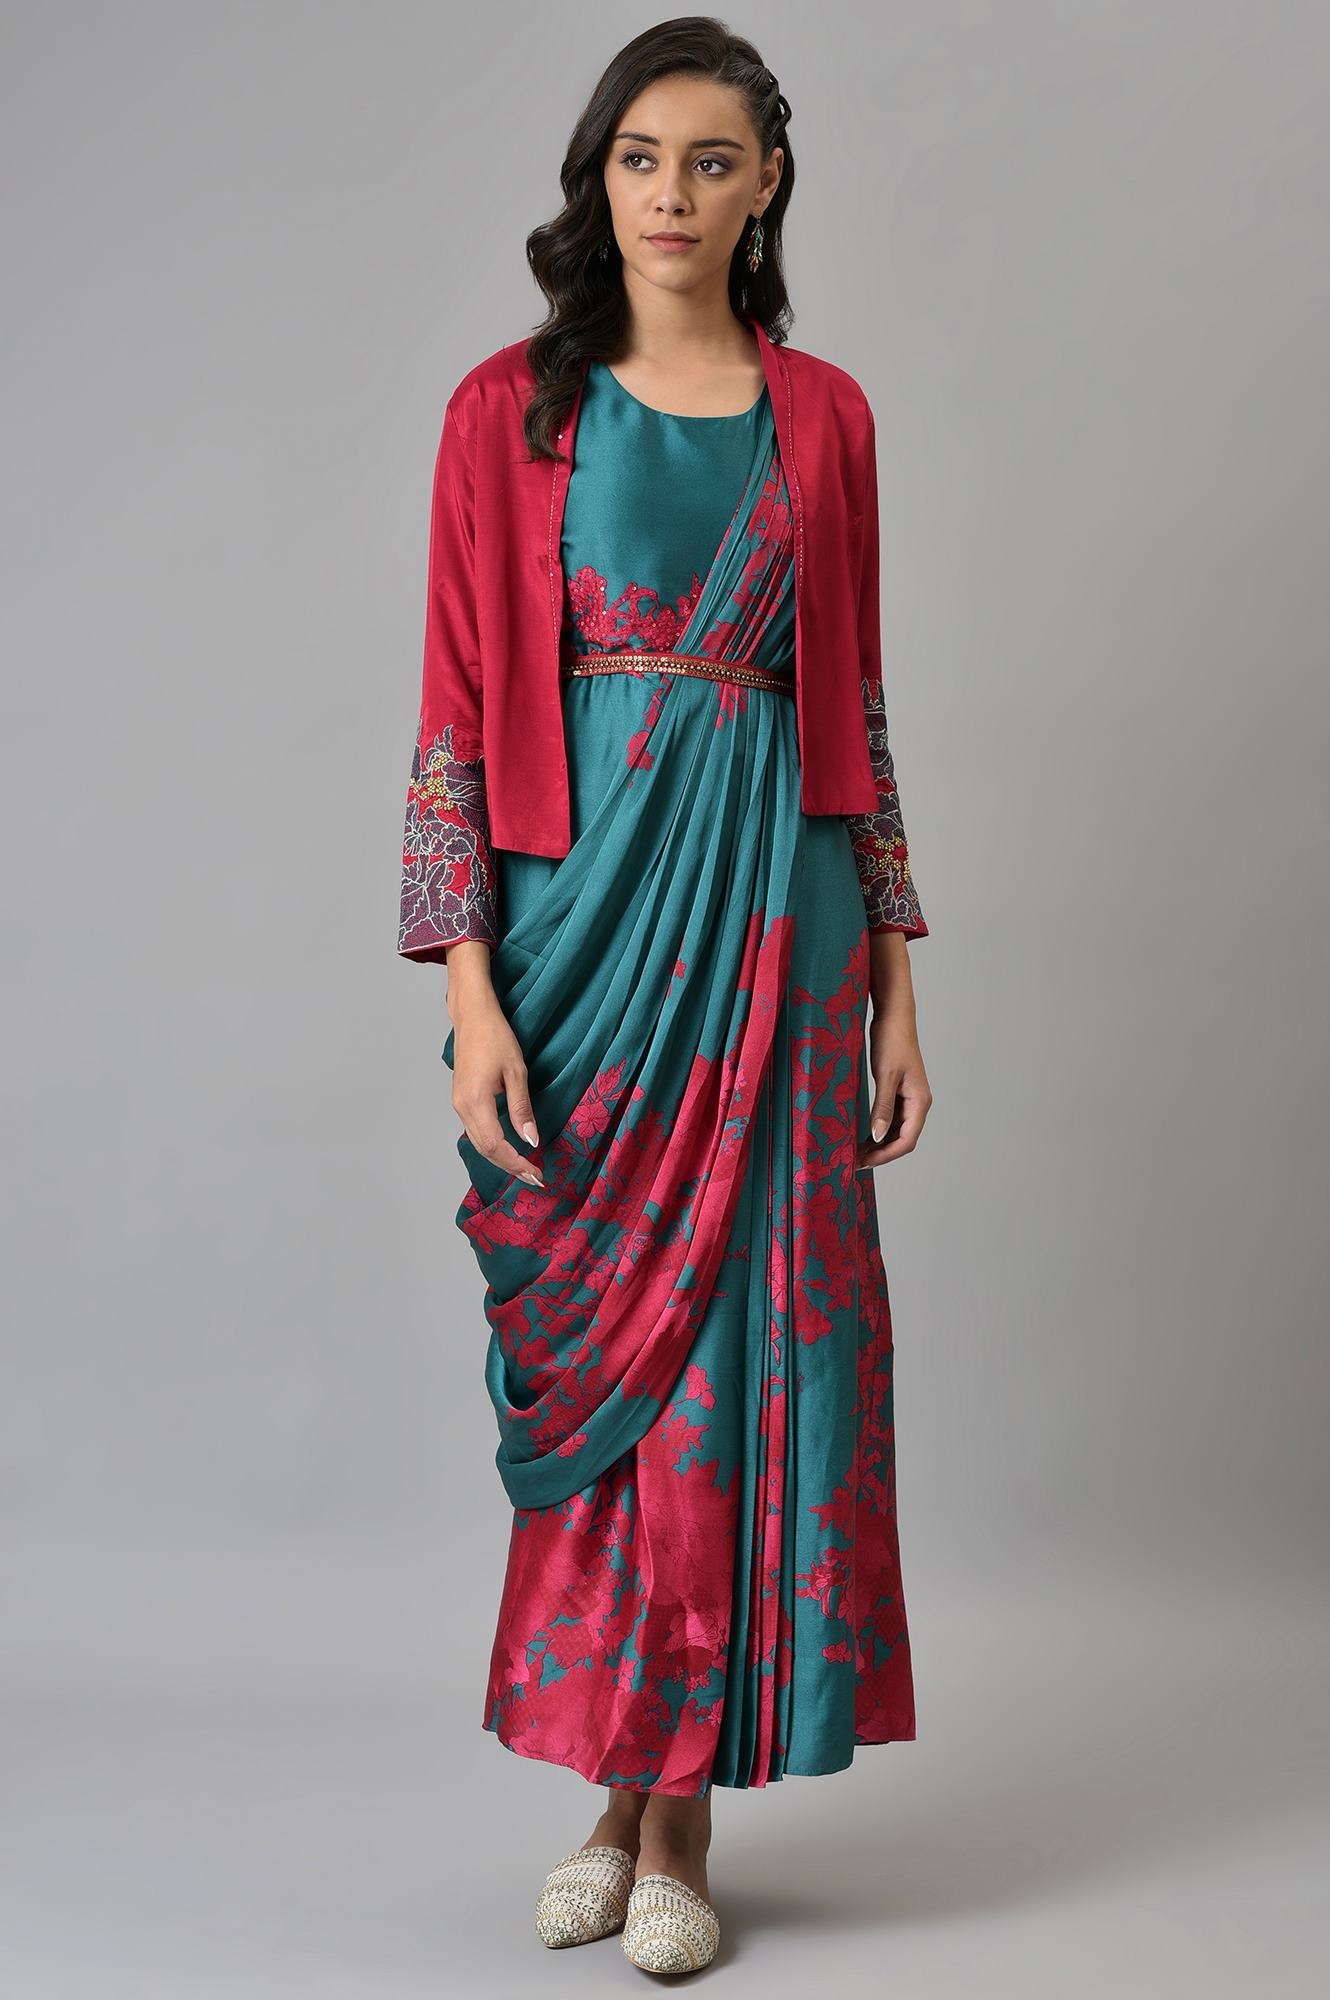 W | Wishful by W Green and Red Sleeveless Predrape Saree Dress with Belt and Tailored Jacket